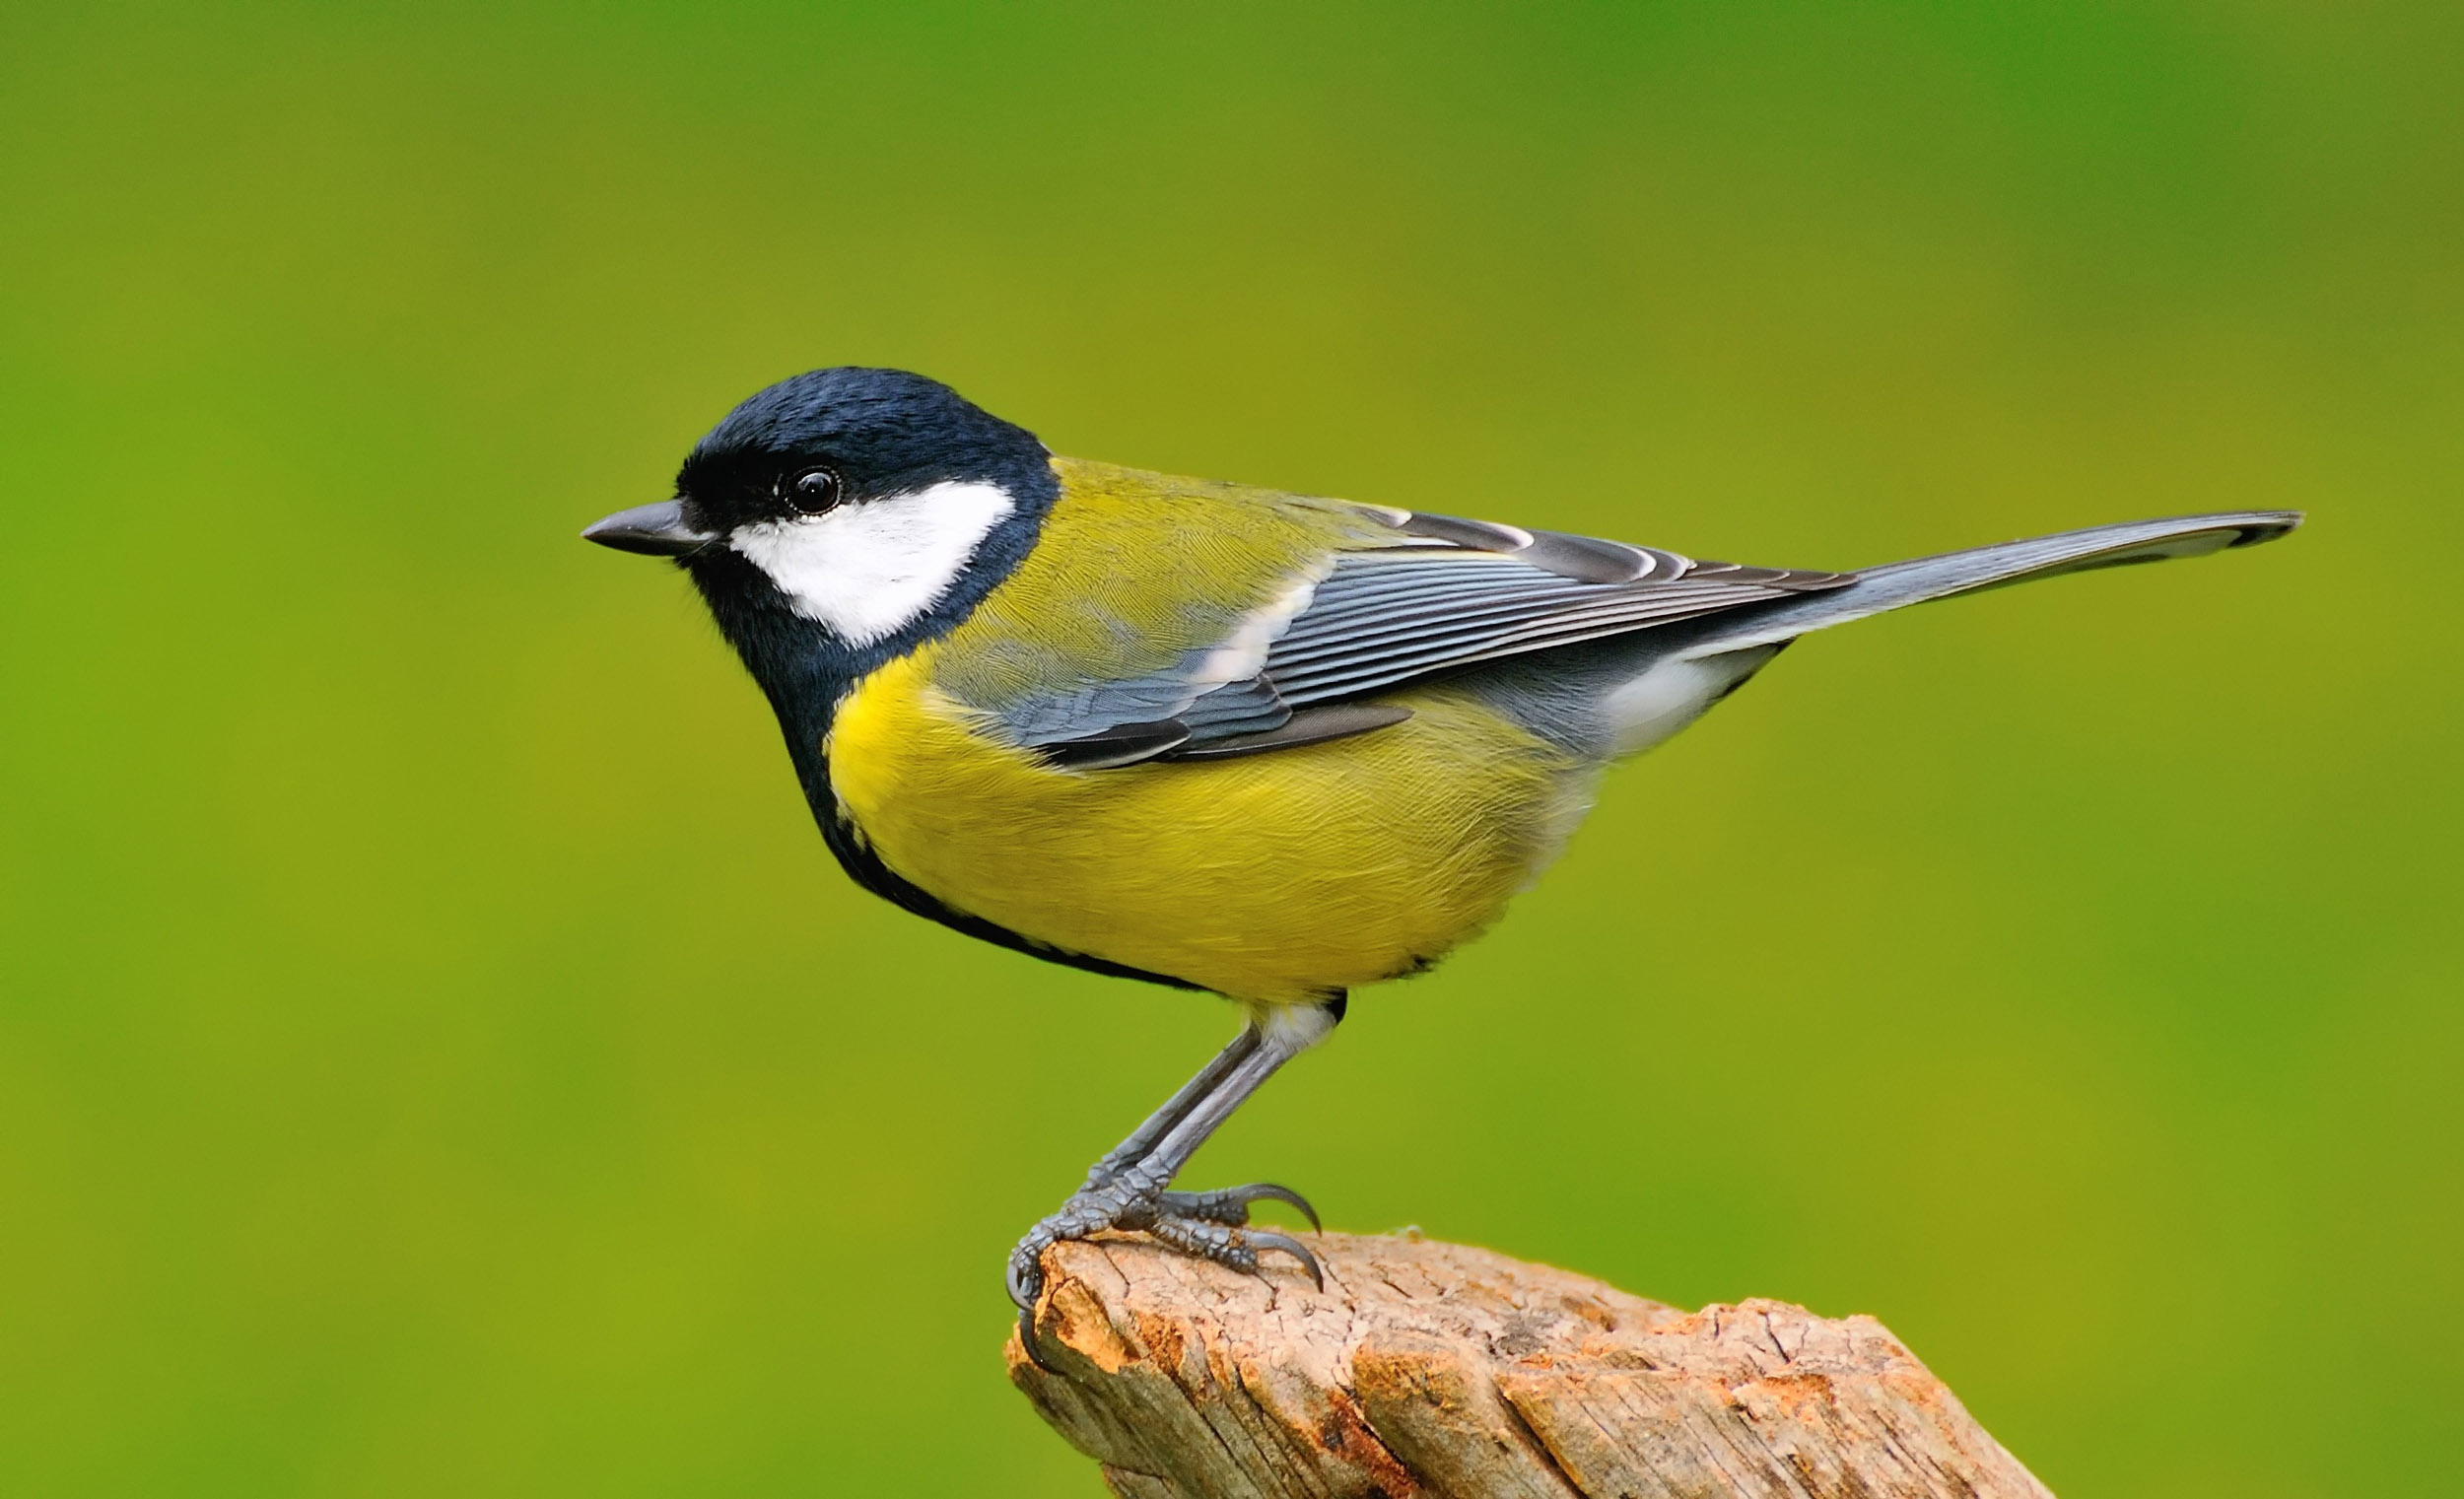 A lone Great Tit perched on a branch against a green background.